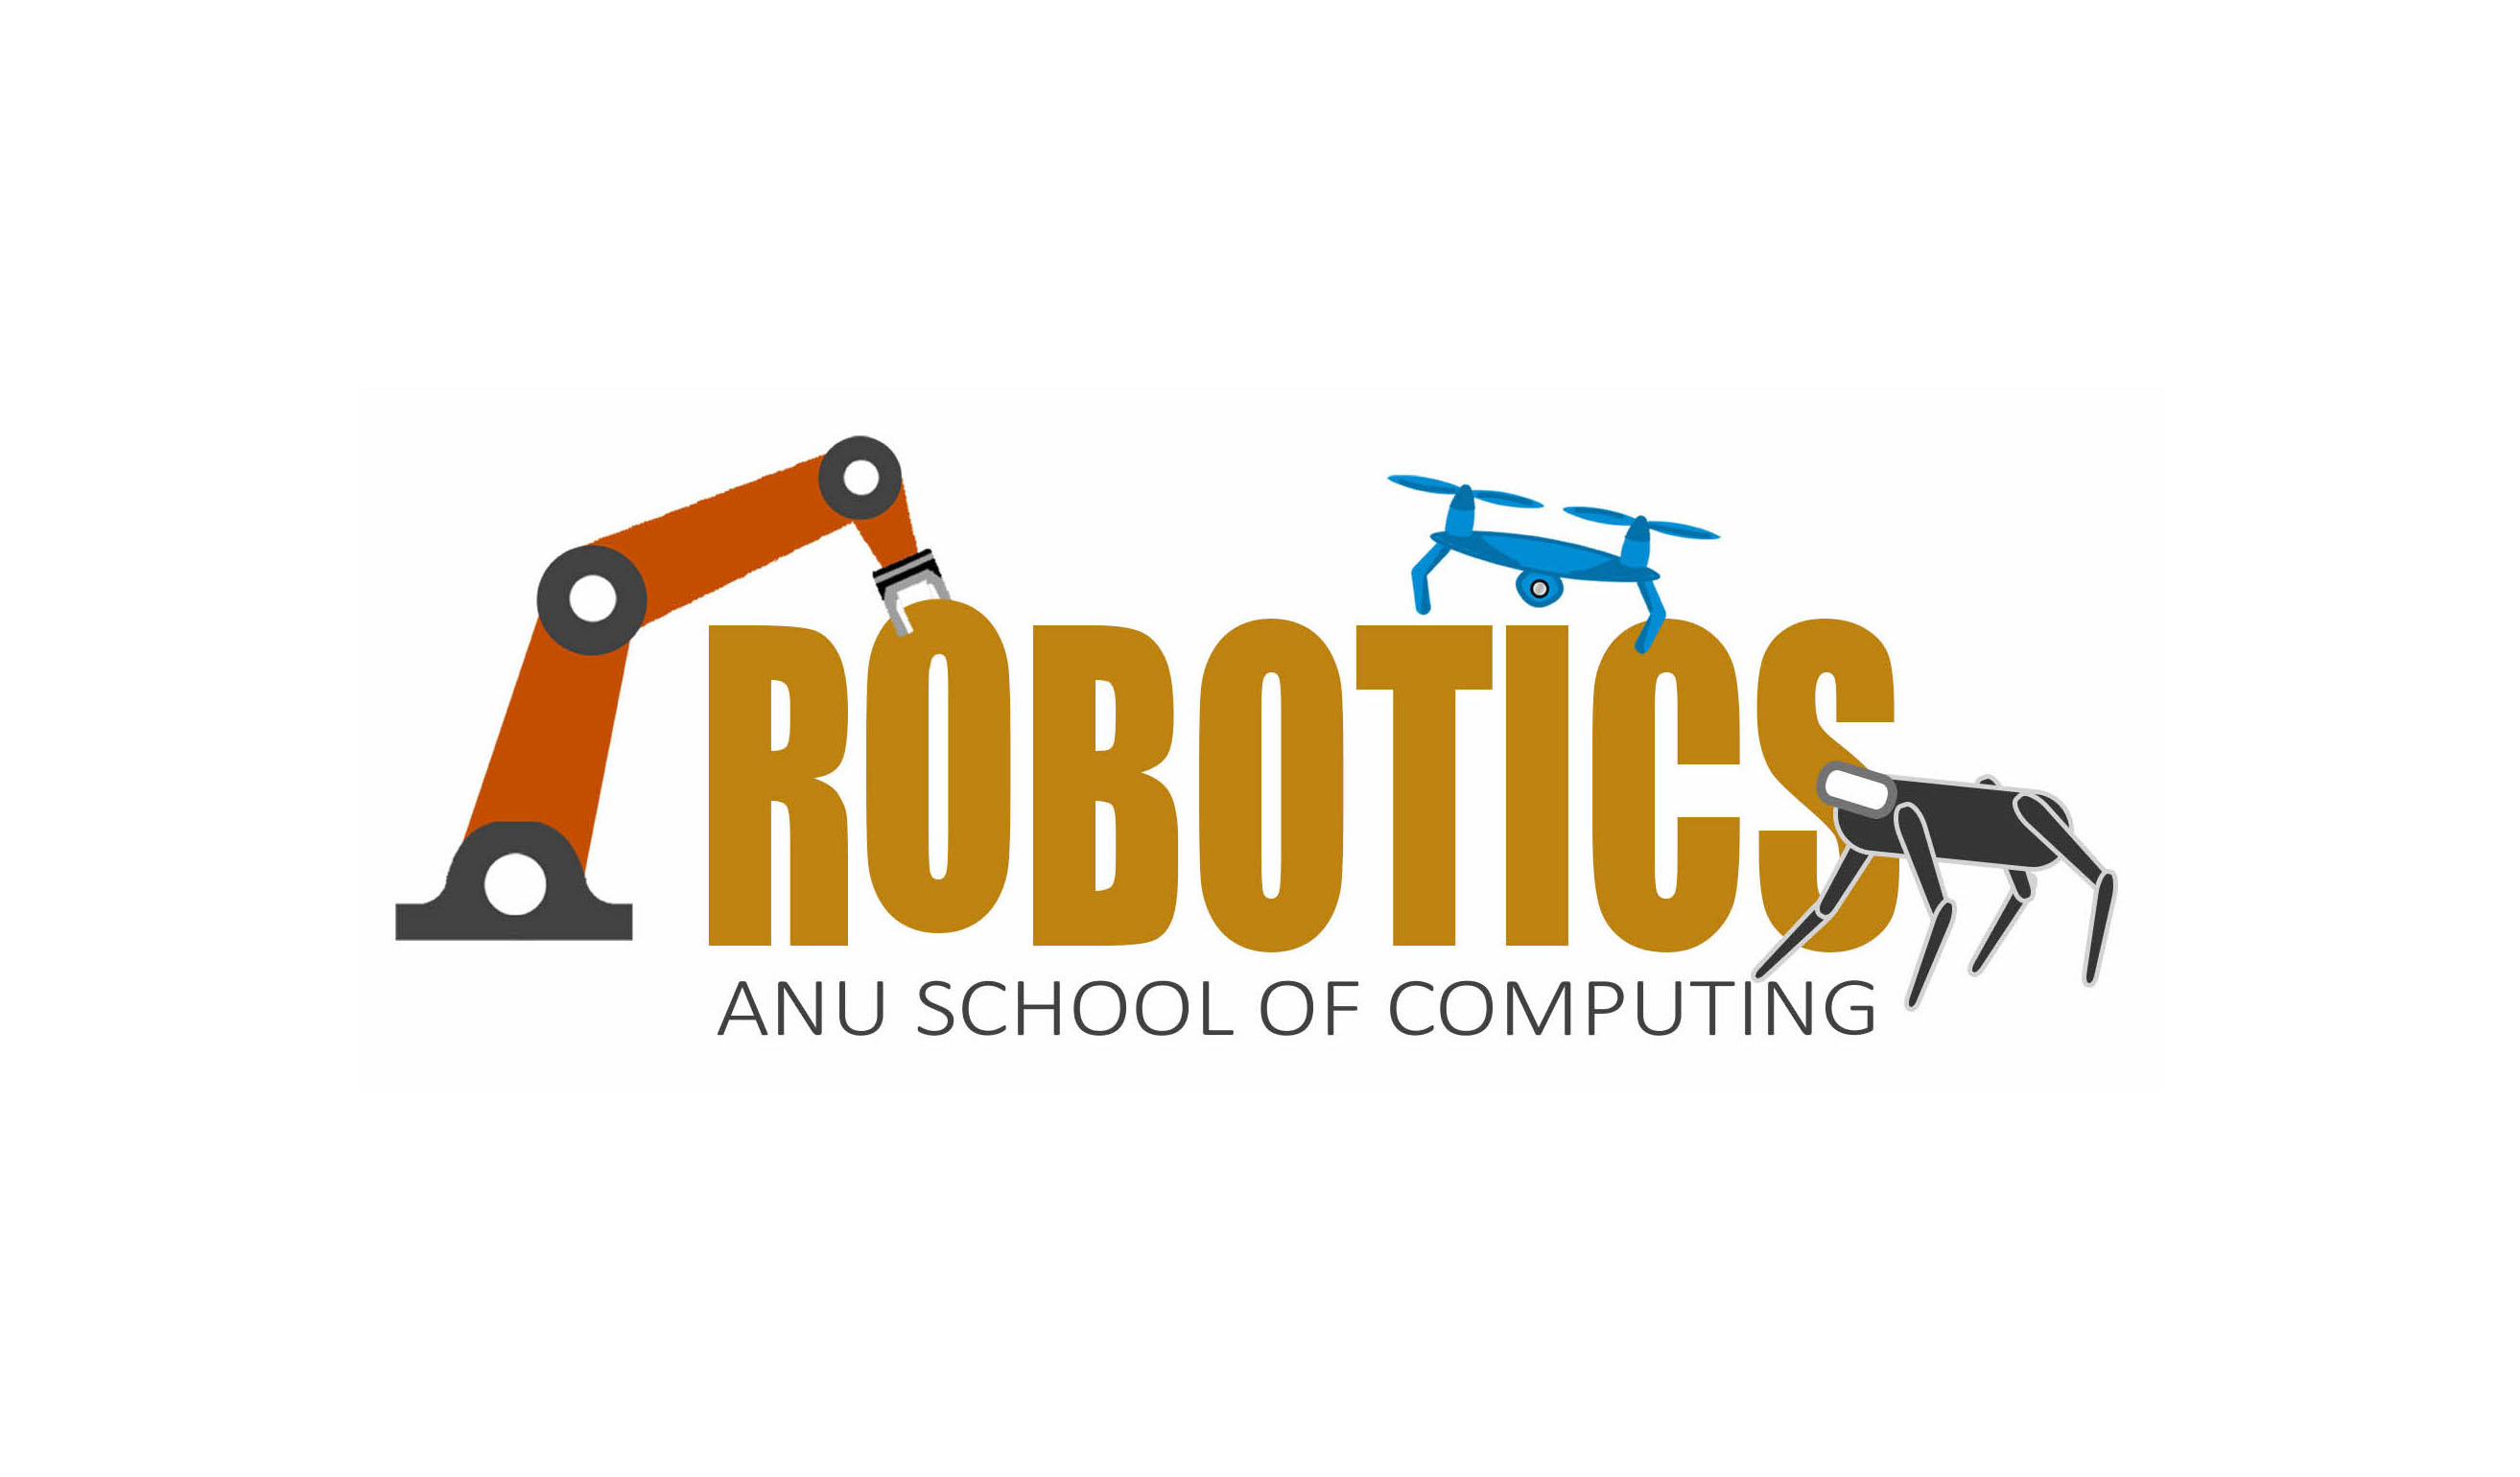 PhD, Research Engineers/Assistants, & Postdoctoral Positions in Robotics
